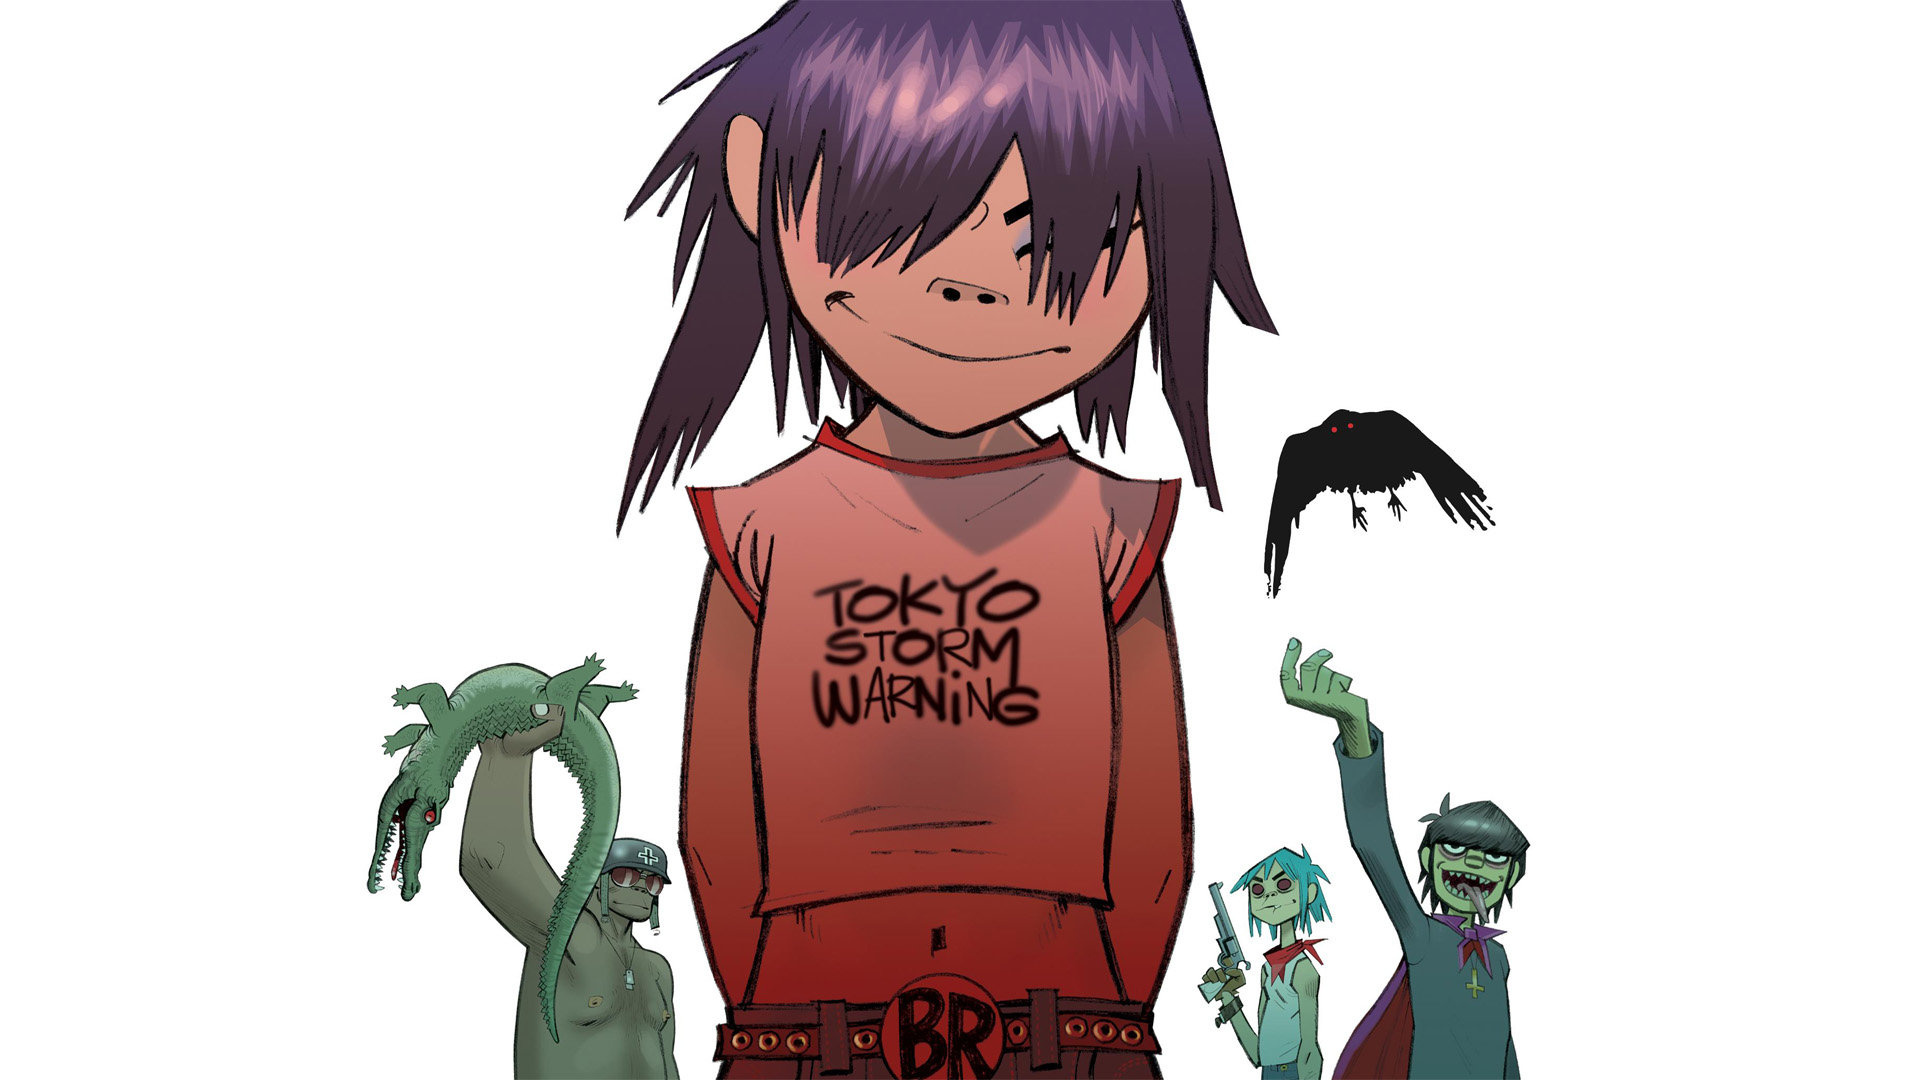 Noodle (Gorillaz): The award-winning virtual group, Phase 2, 2D, Murdoc, Russel. 1920x1080 Full HD Background.